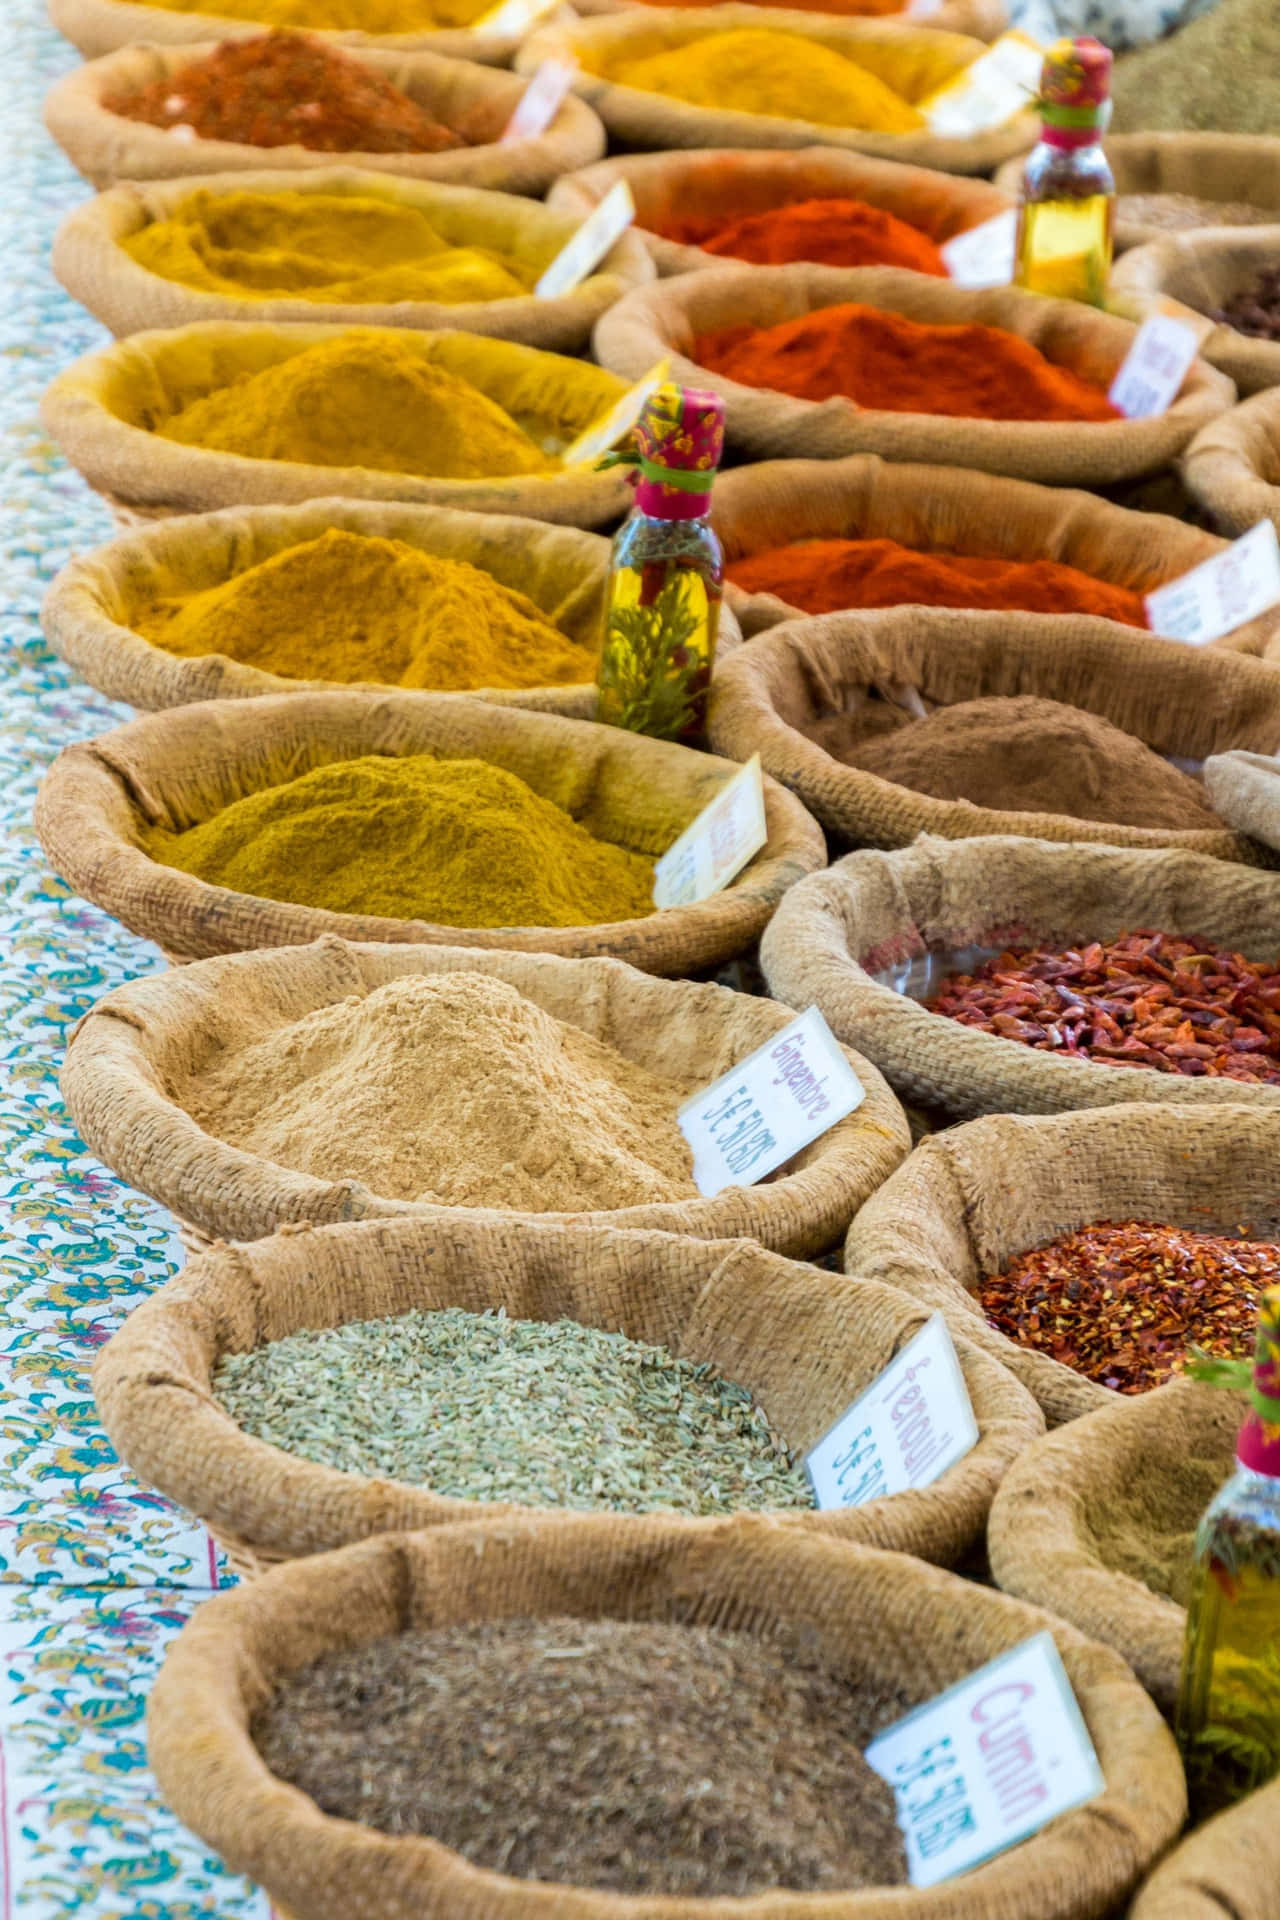 Fill Your Kitchen with Delicious Spice Aromas